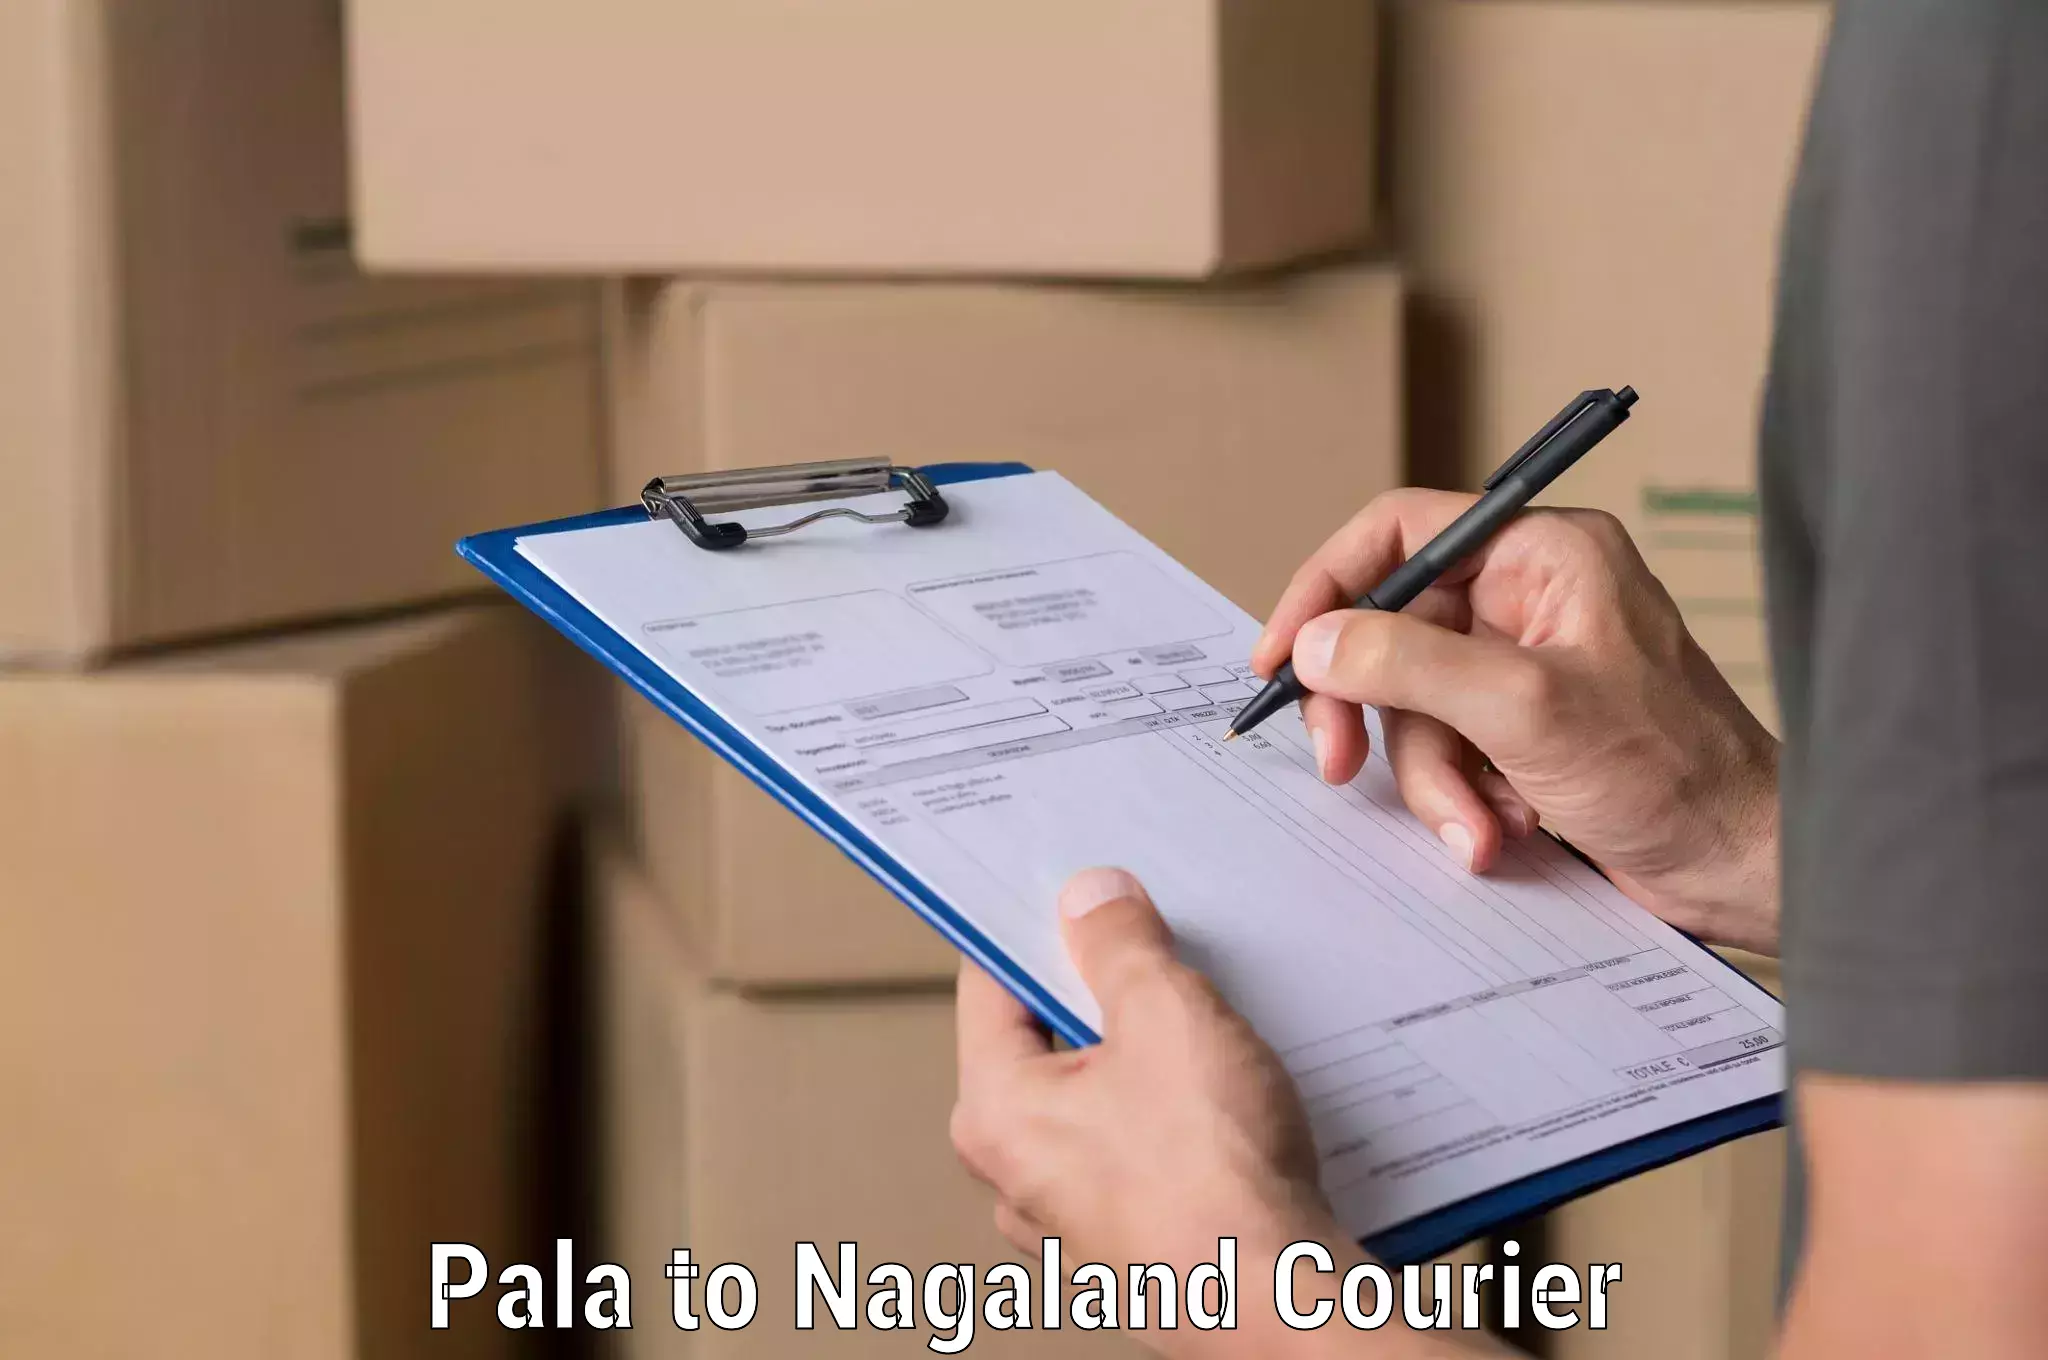 Package delivery network Pala to NIT Nagaland